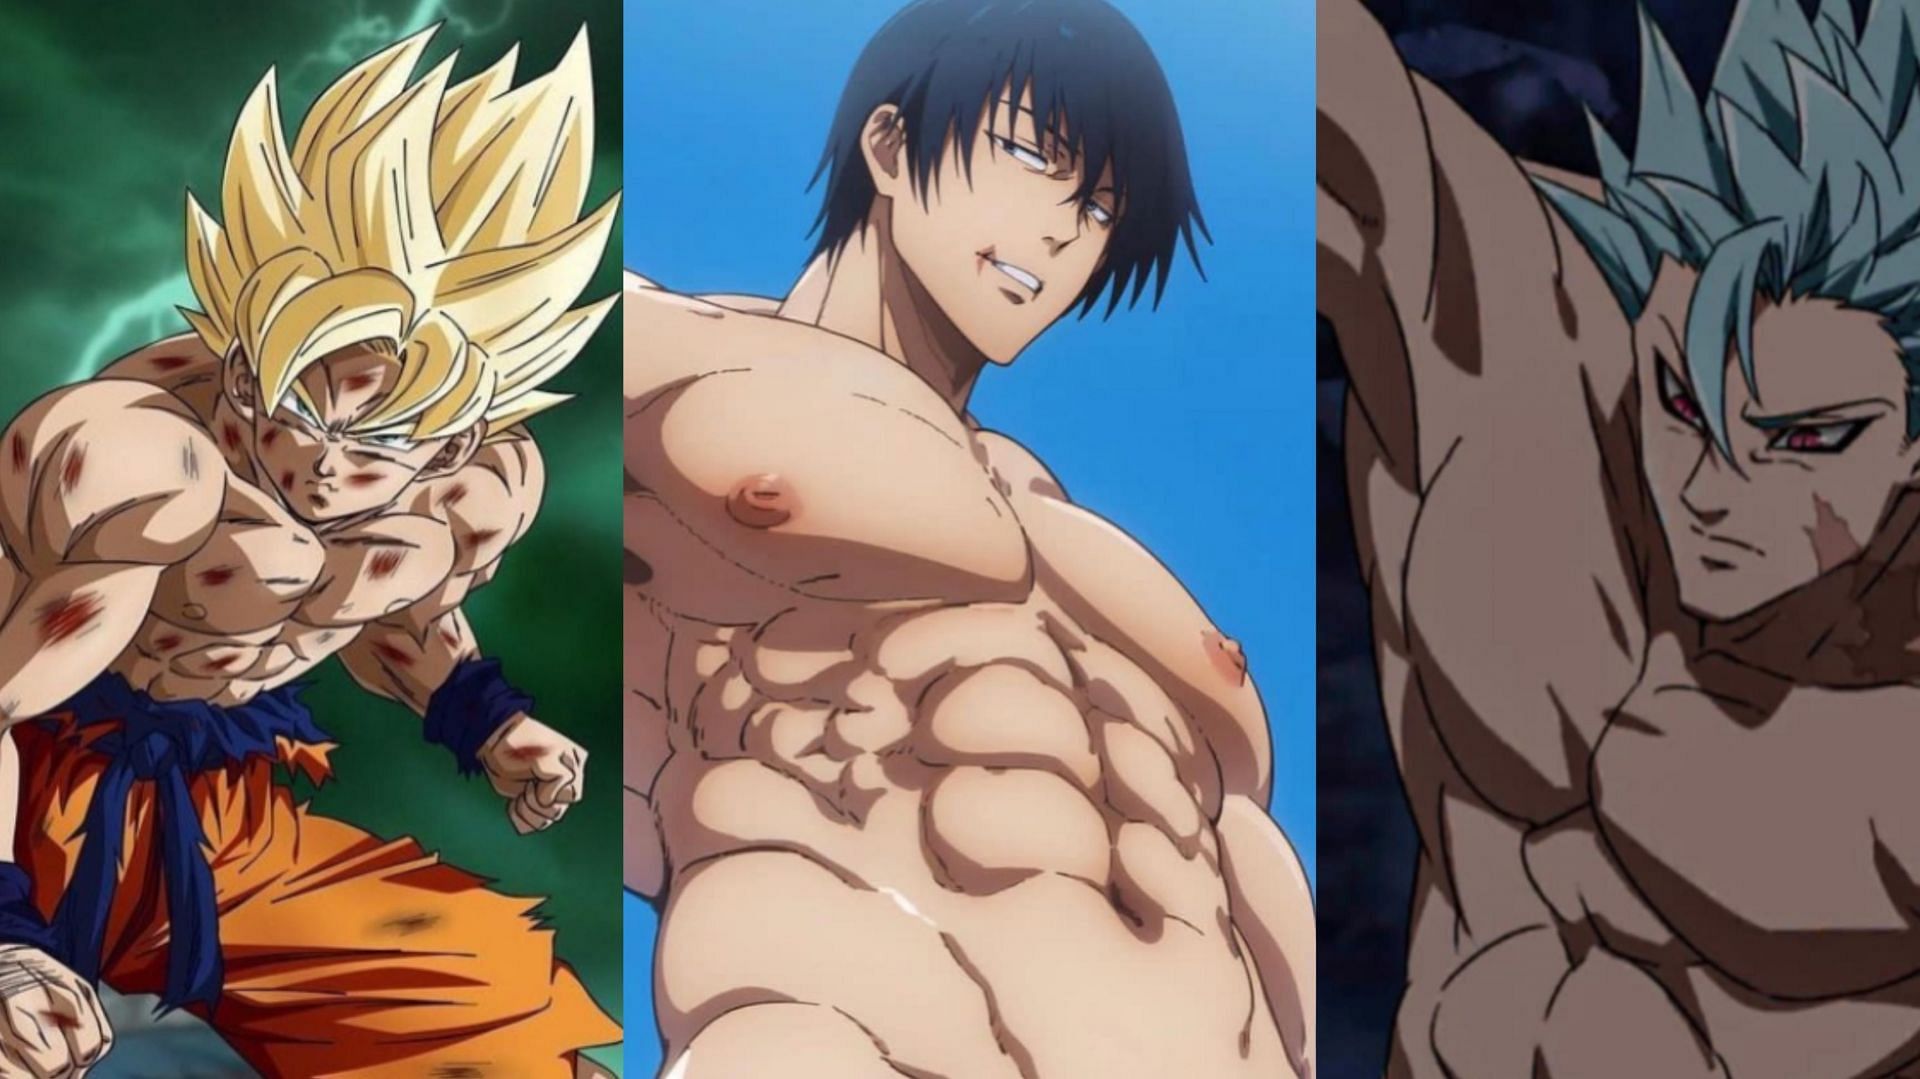 Muscular Anime Characters